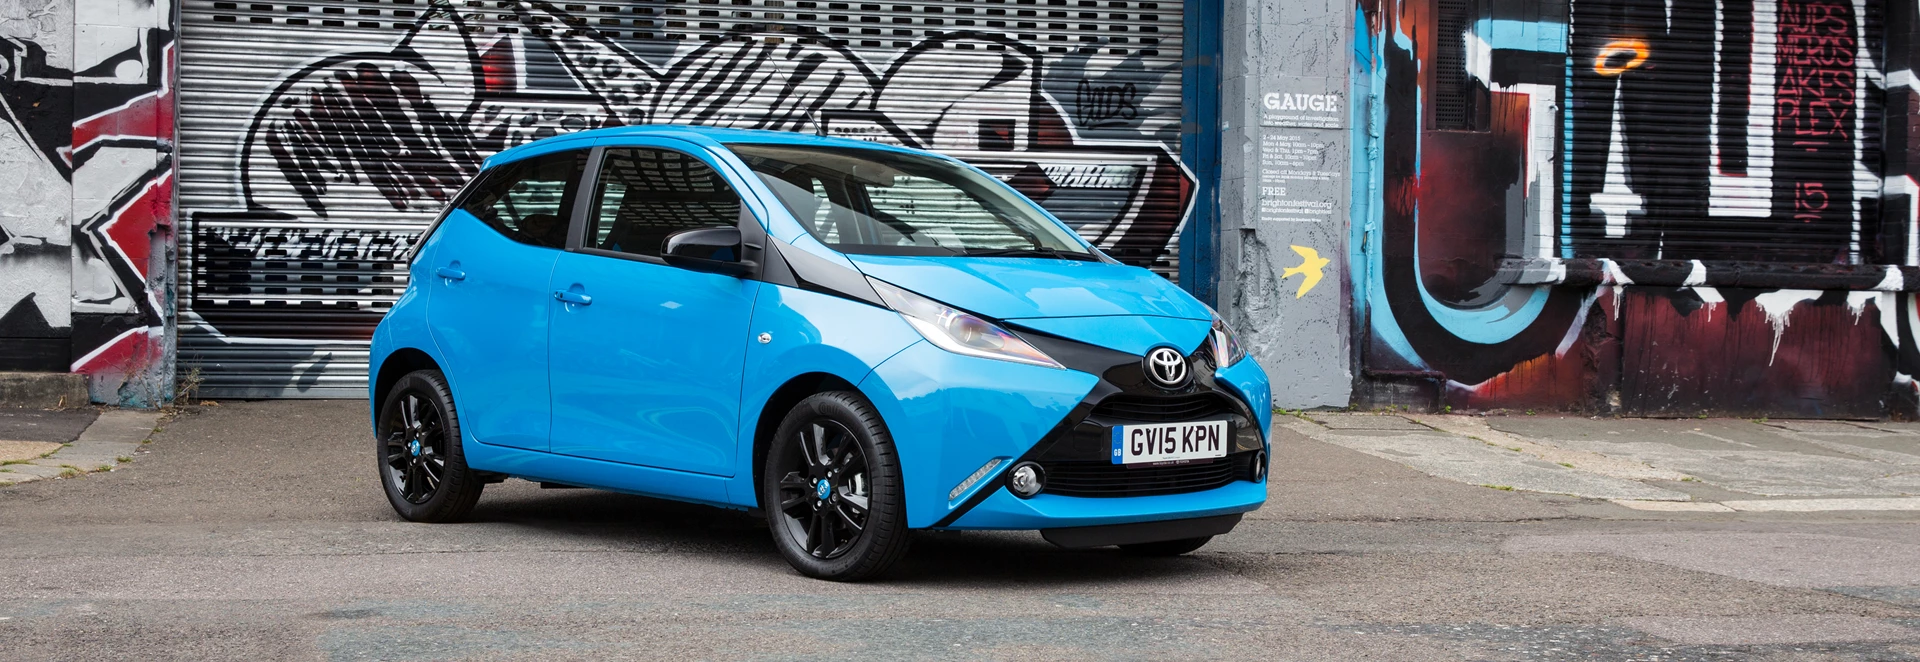 Toyota Aygo 1.0-litre x-cite hatchback review 